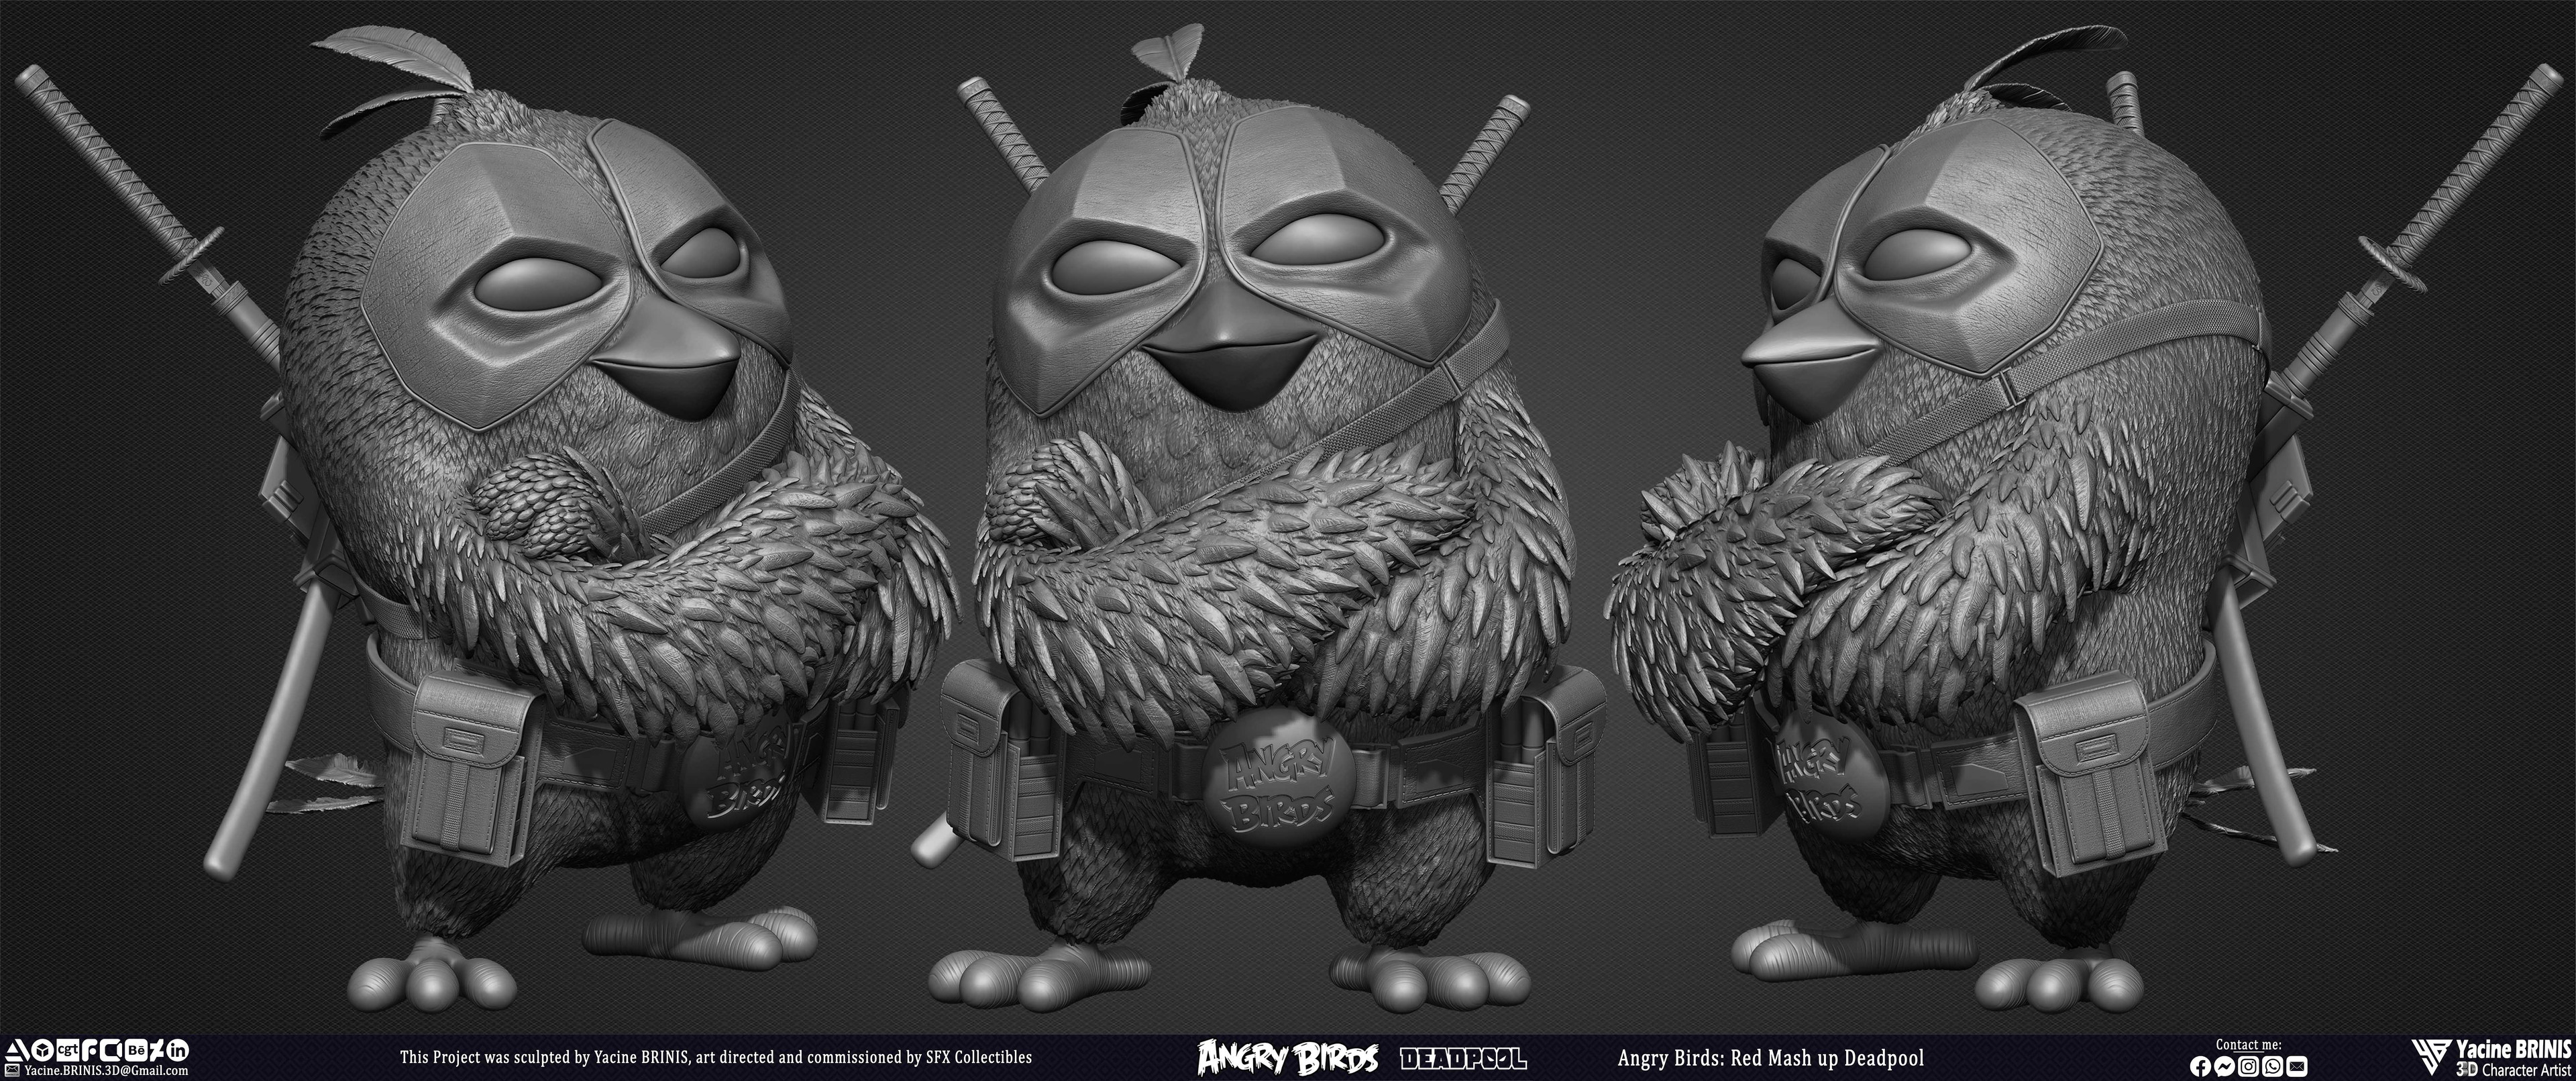 Red Mash Up Deadpool Angry Birds Movie 02 Rovio Entertainment sculpted By Yacine BRINIS 003